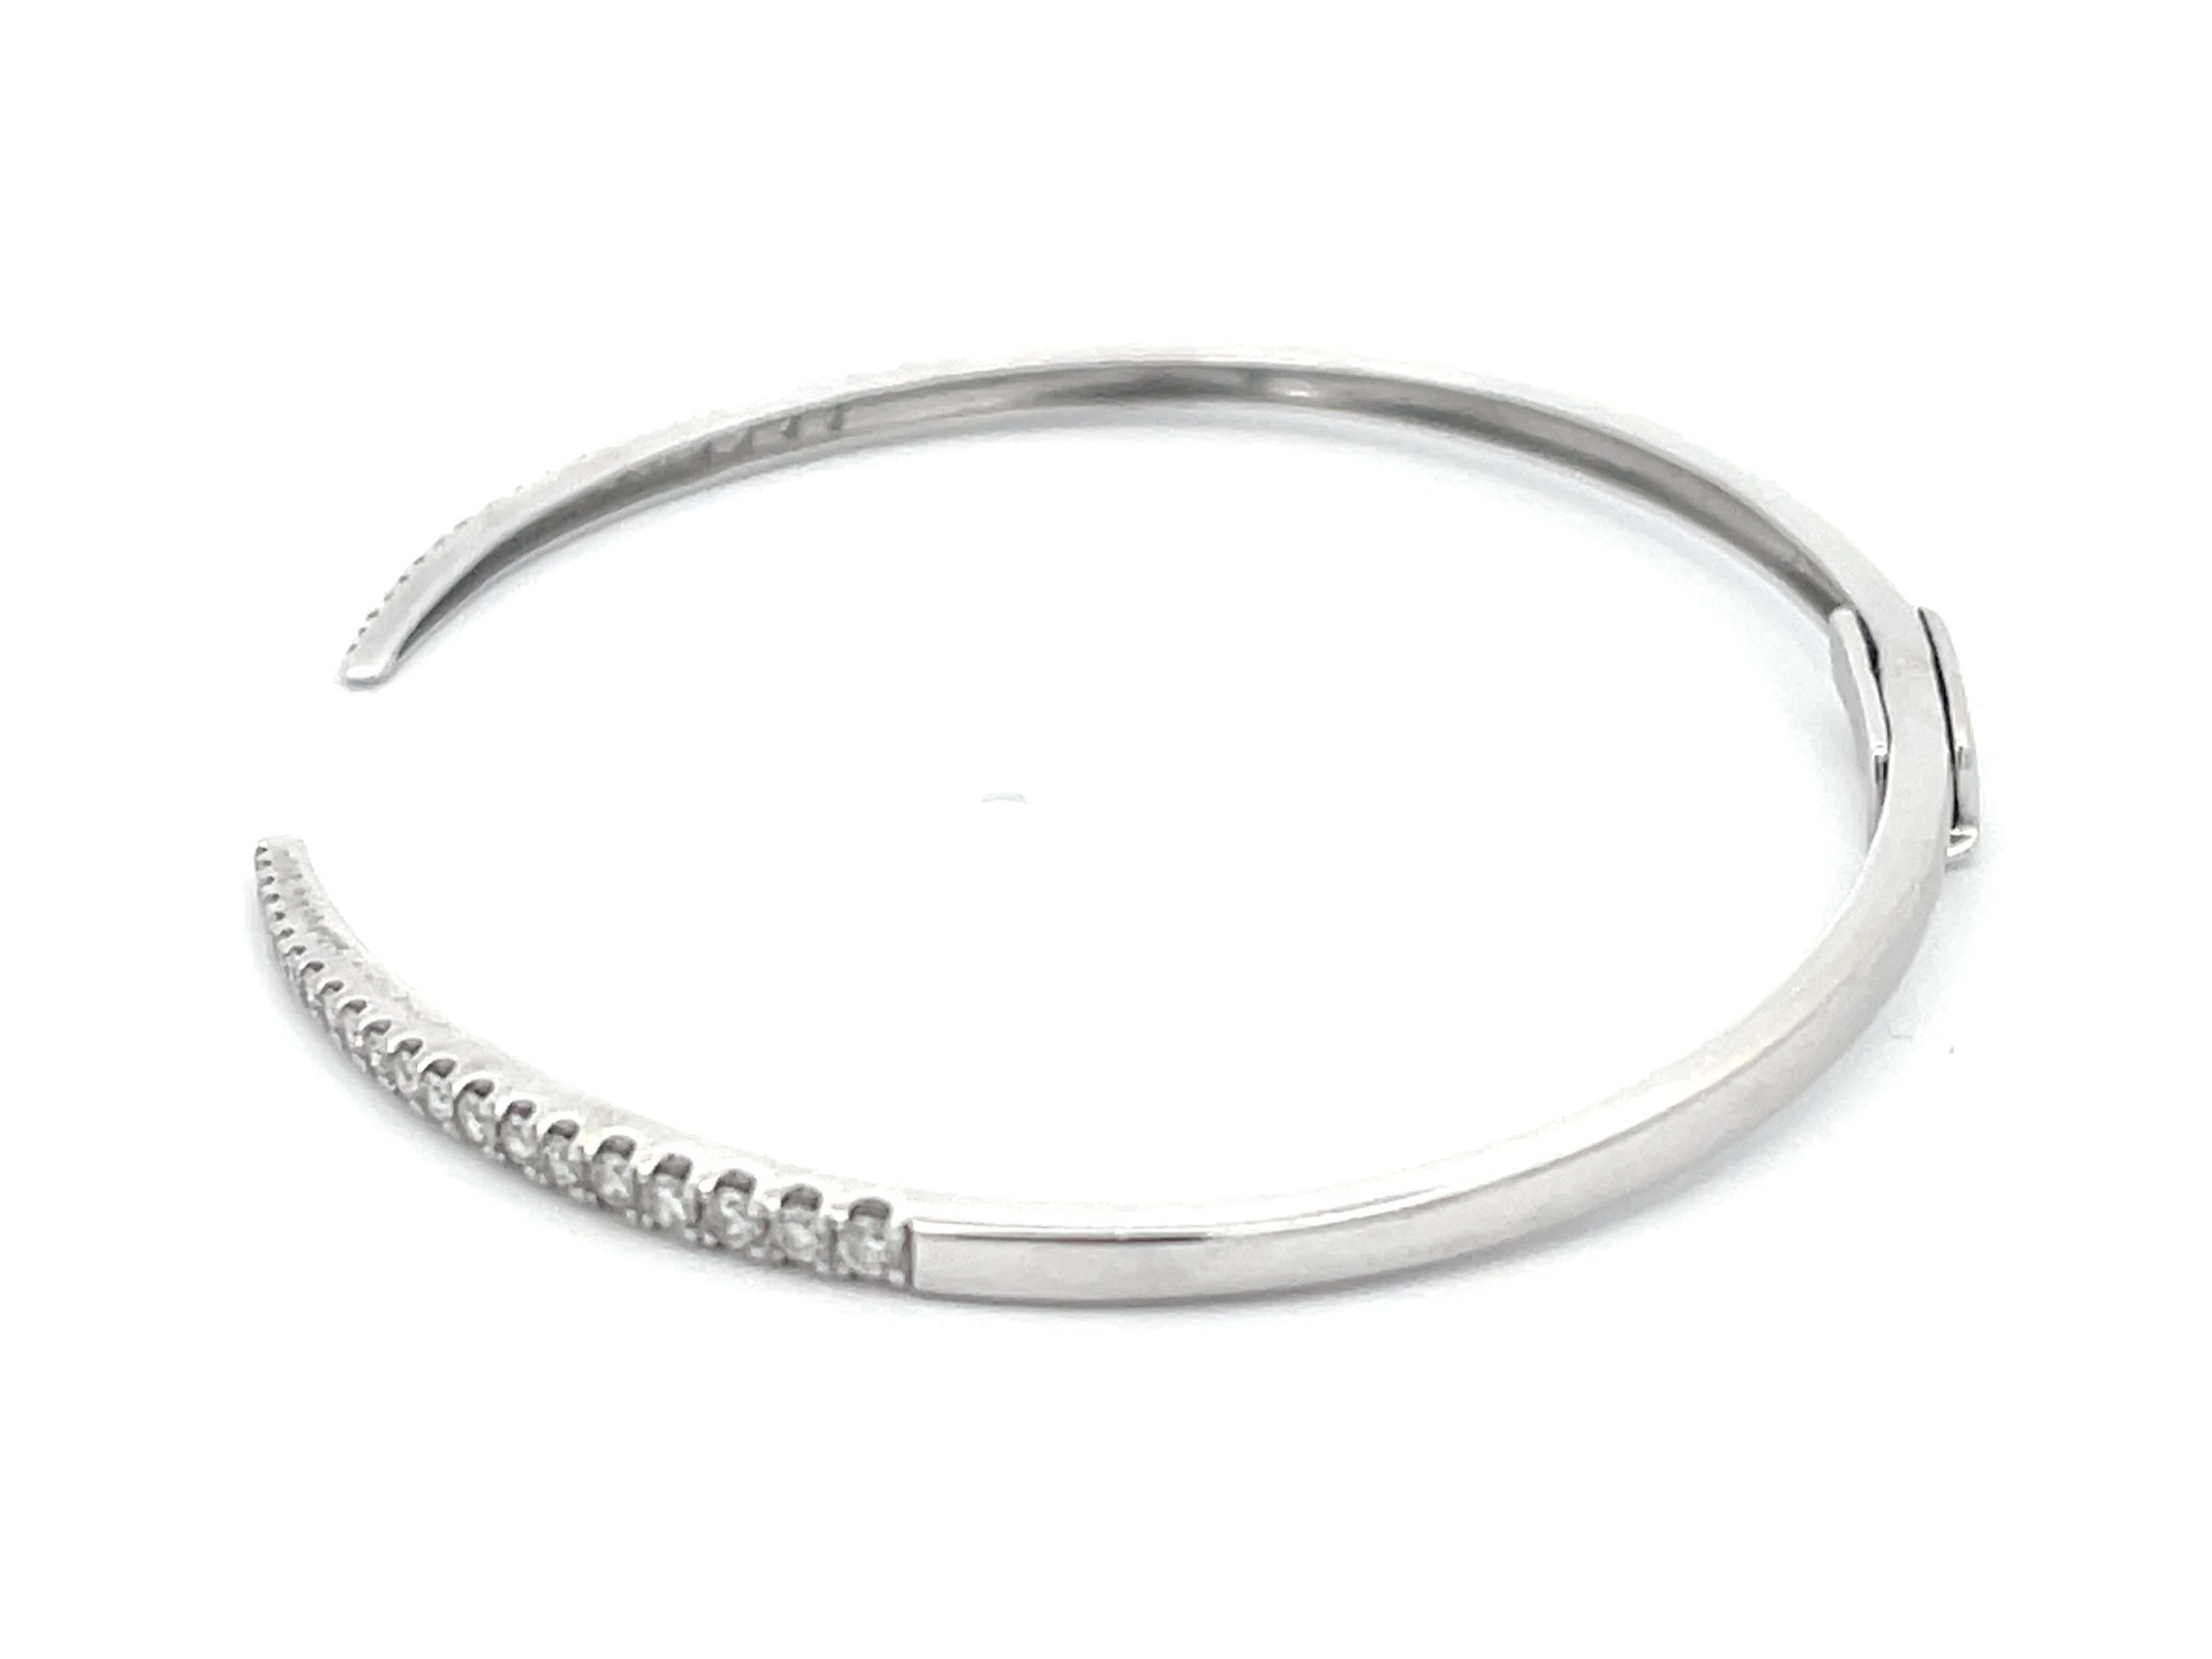 Open Claw Diamond Bangle in 14k White Gold In Excellent Condition For Sale In Honolulu, HI